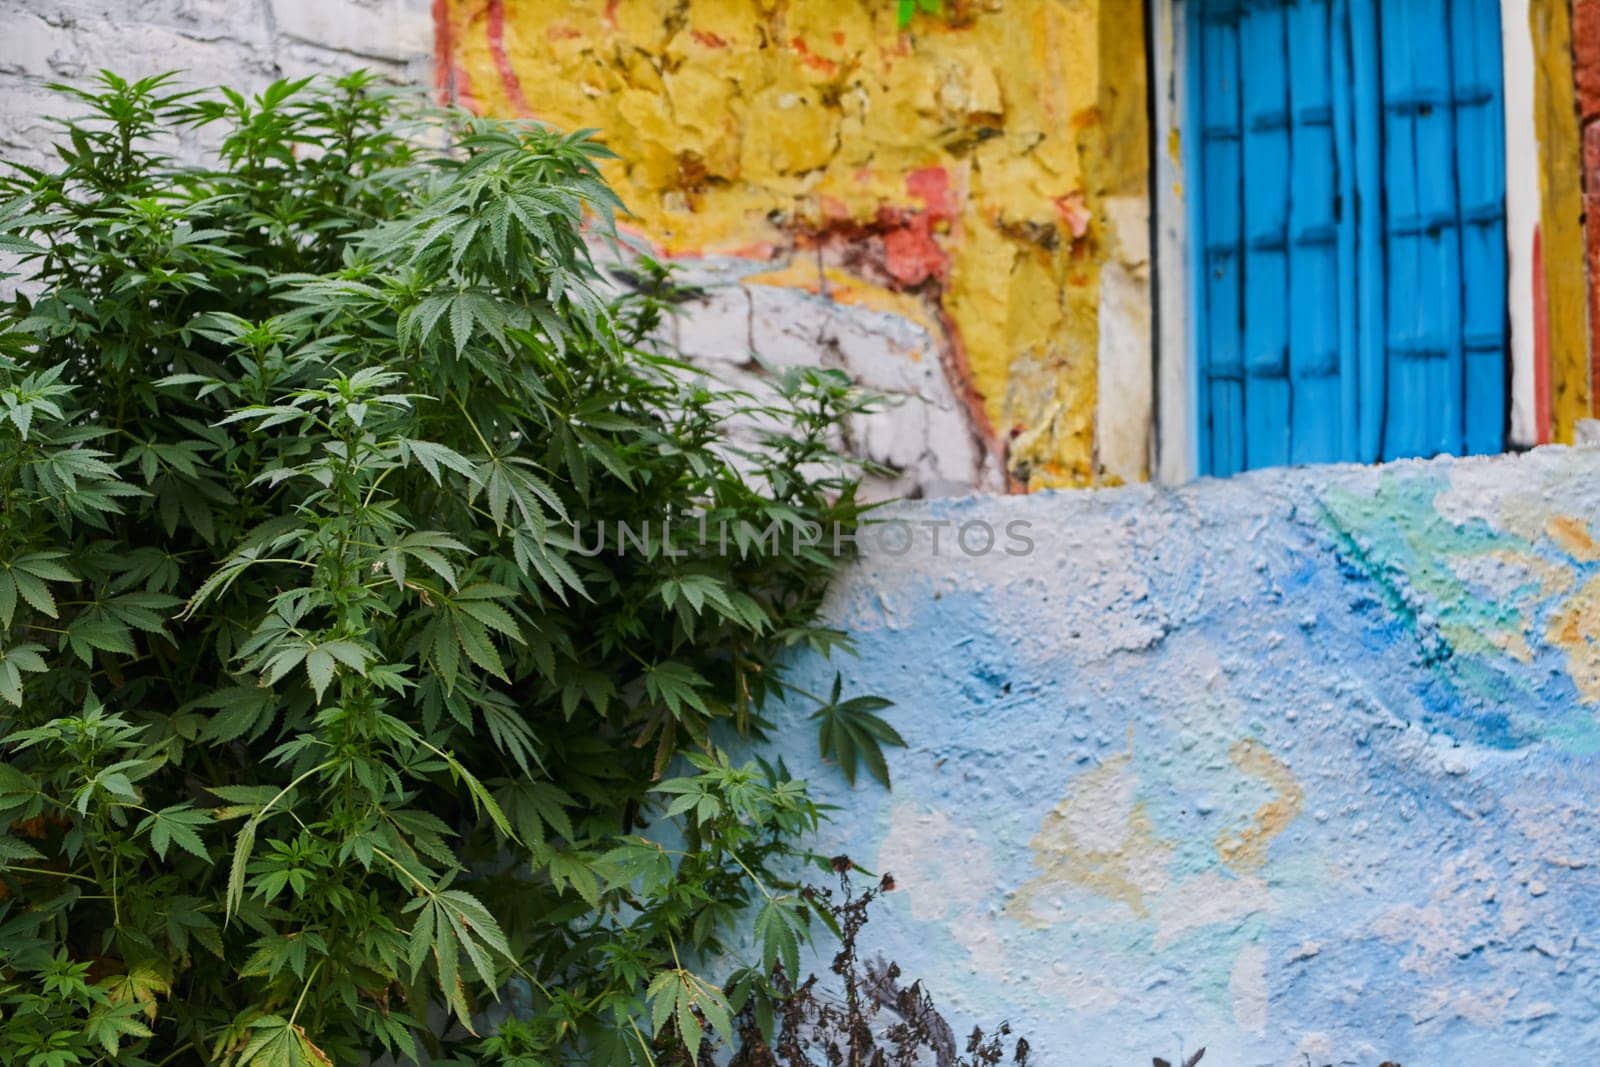 A close-up photo of fresh marijuana leaves in an urban setting, showcasing the vibrant green foliage of the cannabis plant amidst the cityscape